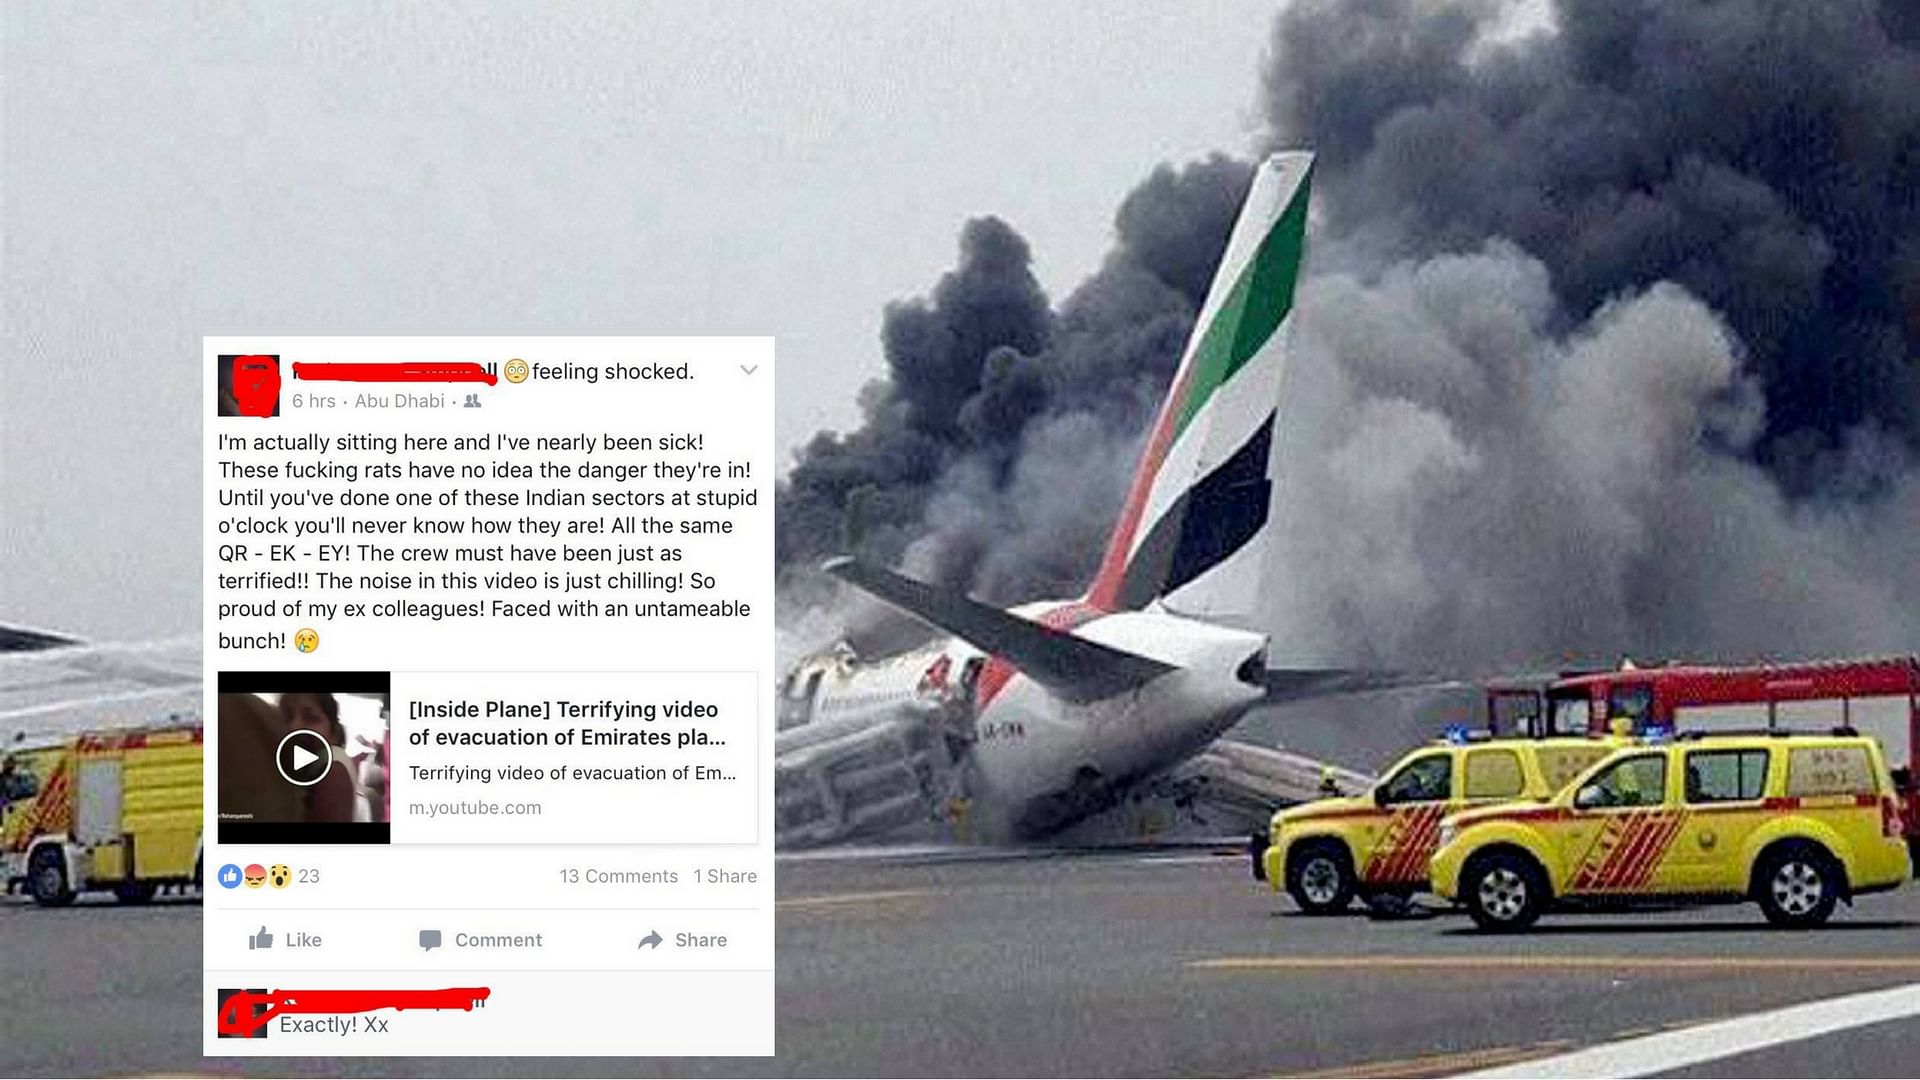 The Emirates plane crash-landed at the Dubai airport and caught fire on the runway. (Photo: PTI)